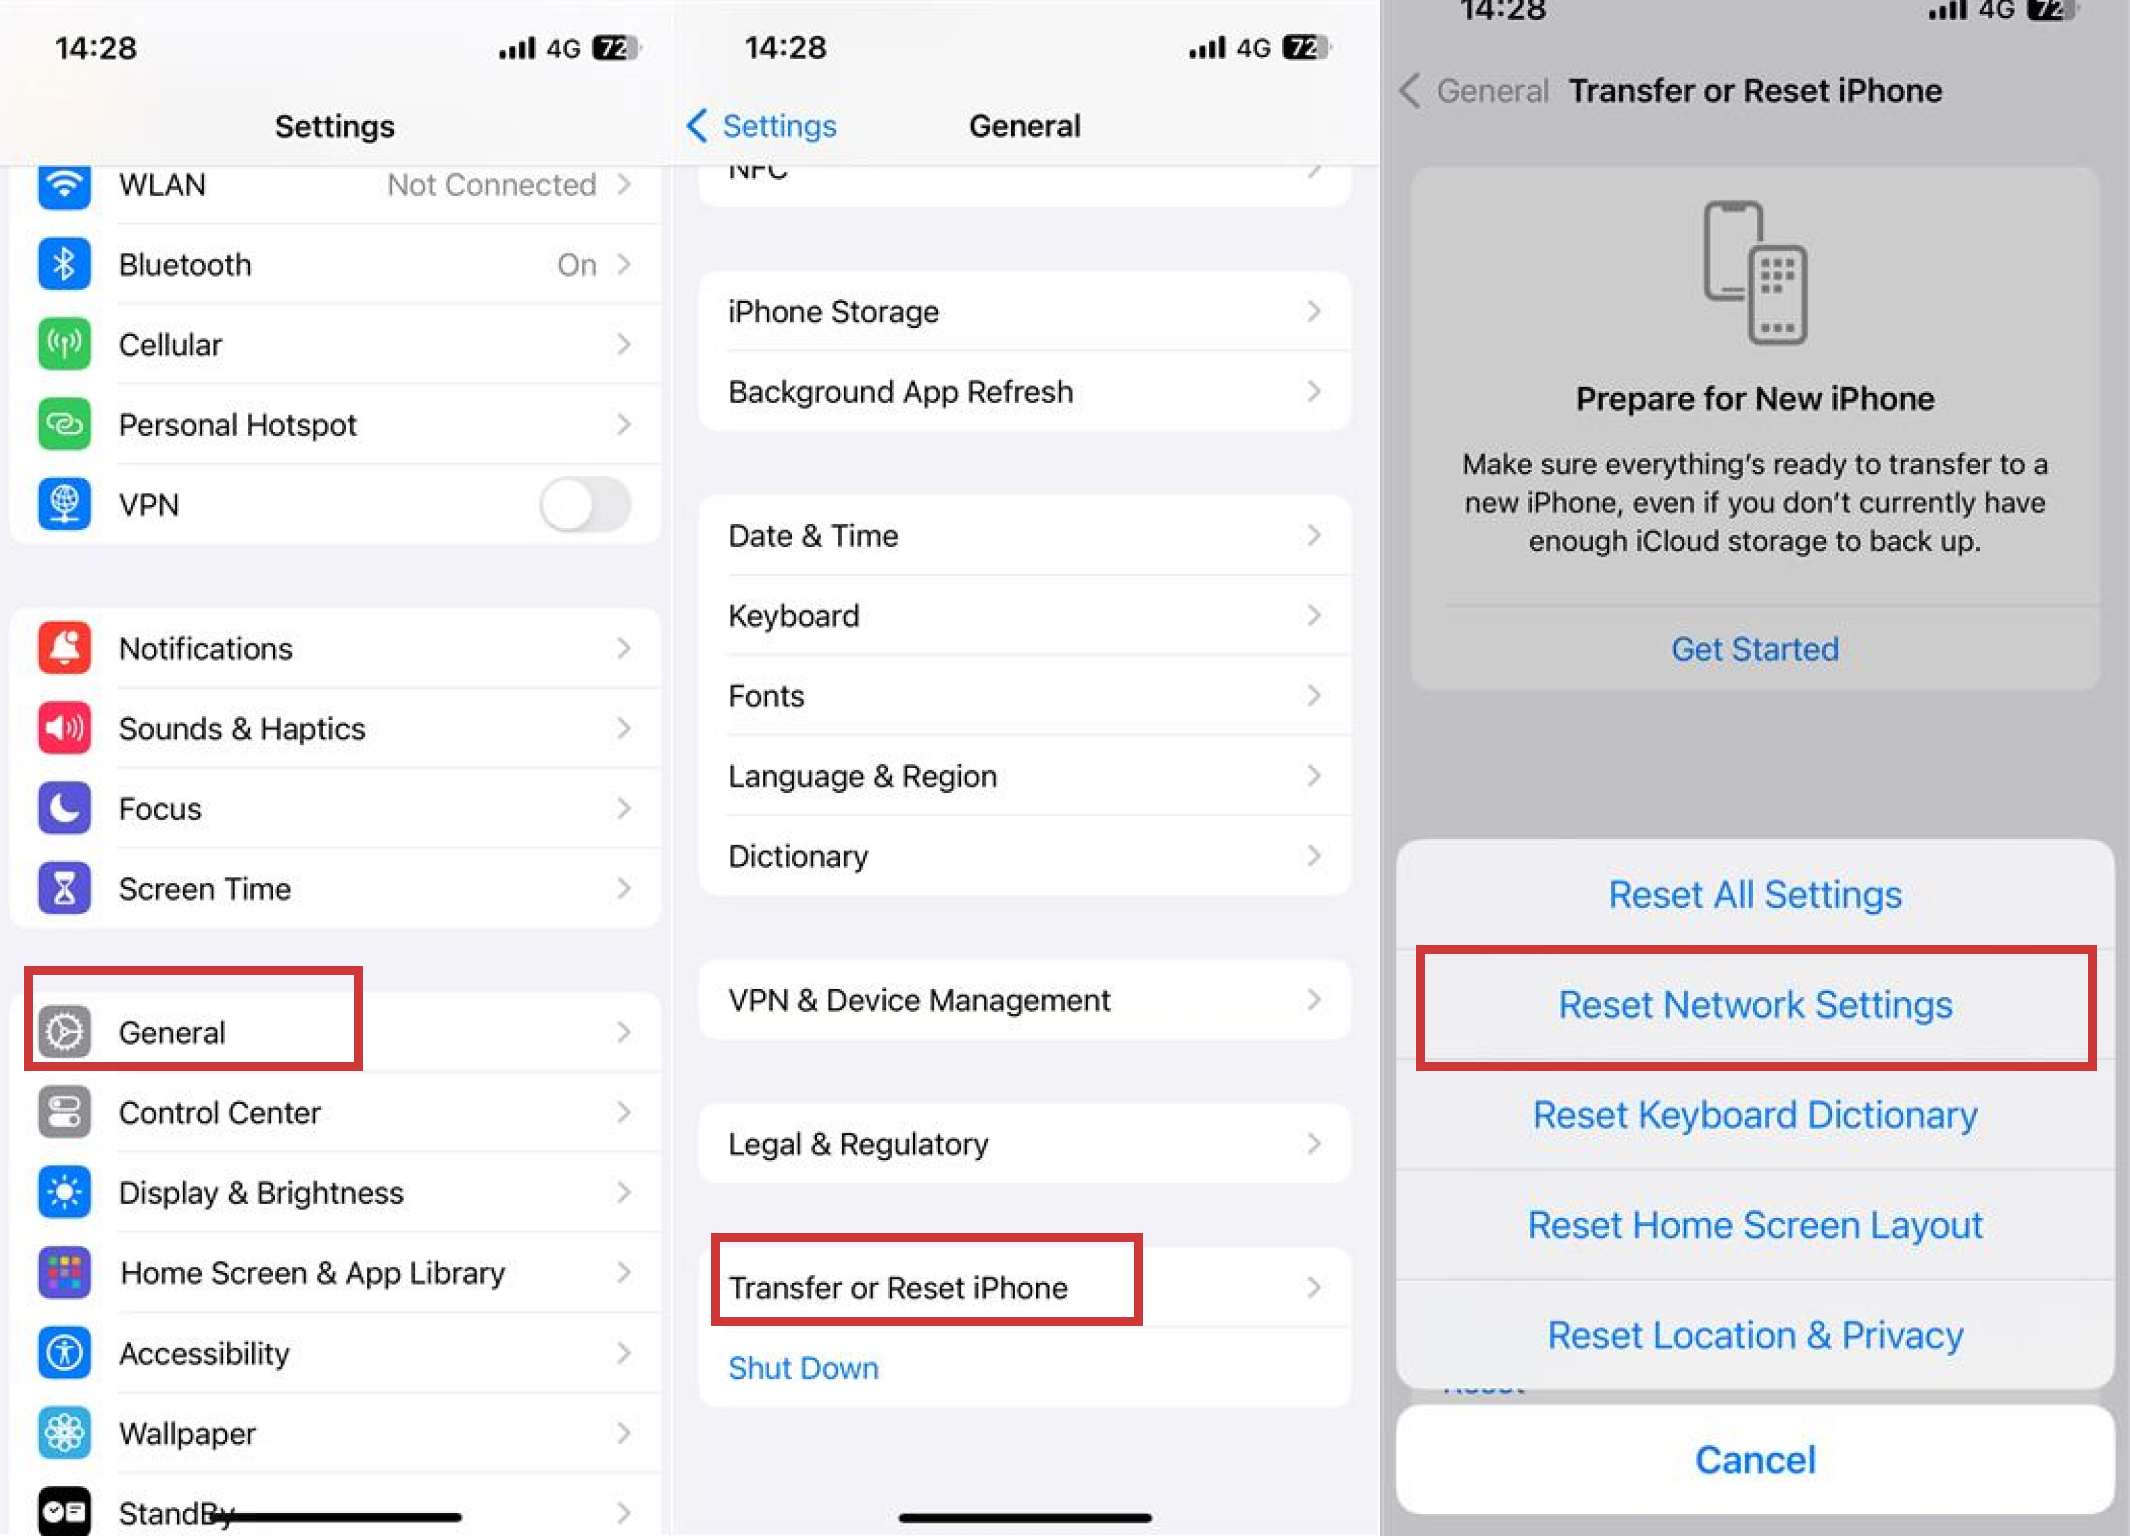 try resetting network settings in reset after you go to general